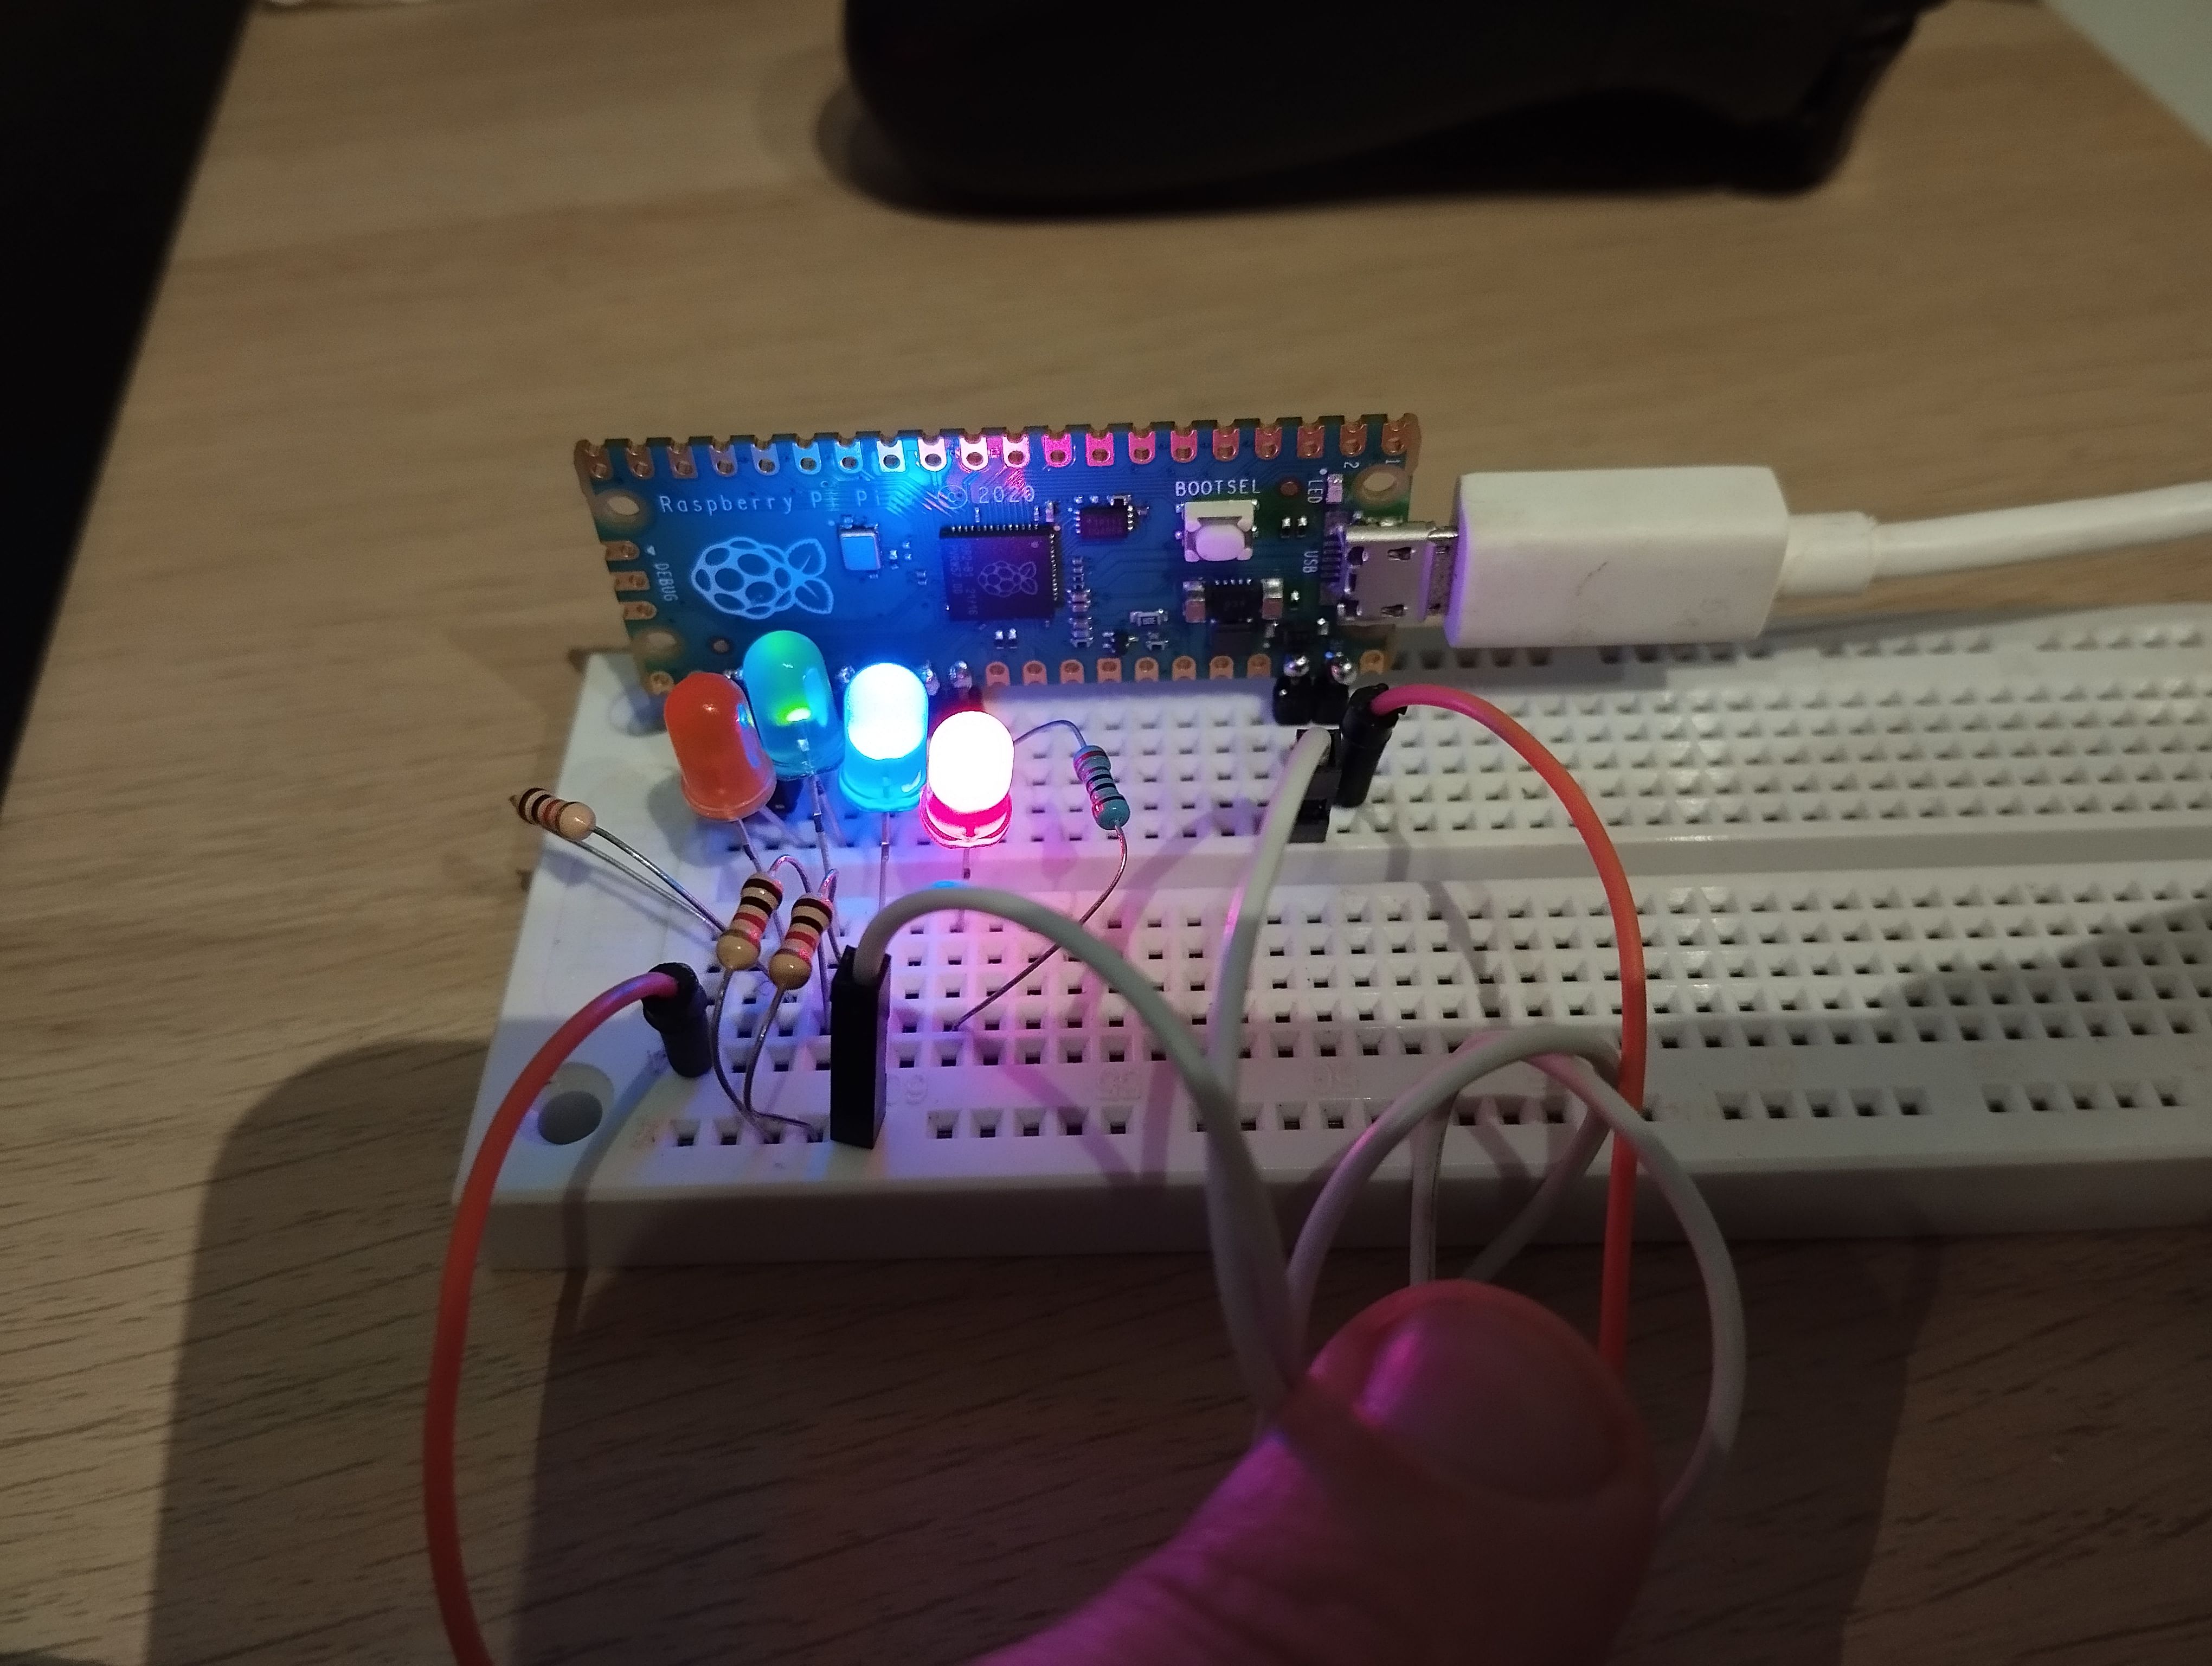 Breadboard that helped me figure out the firmware. Four colored LEDs, one for each important output signal, and a pushbutton are visible. Some of the LEDS are lit.